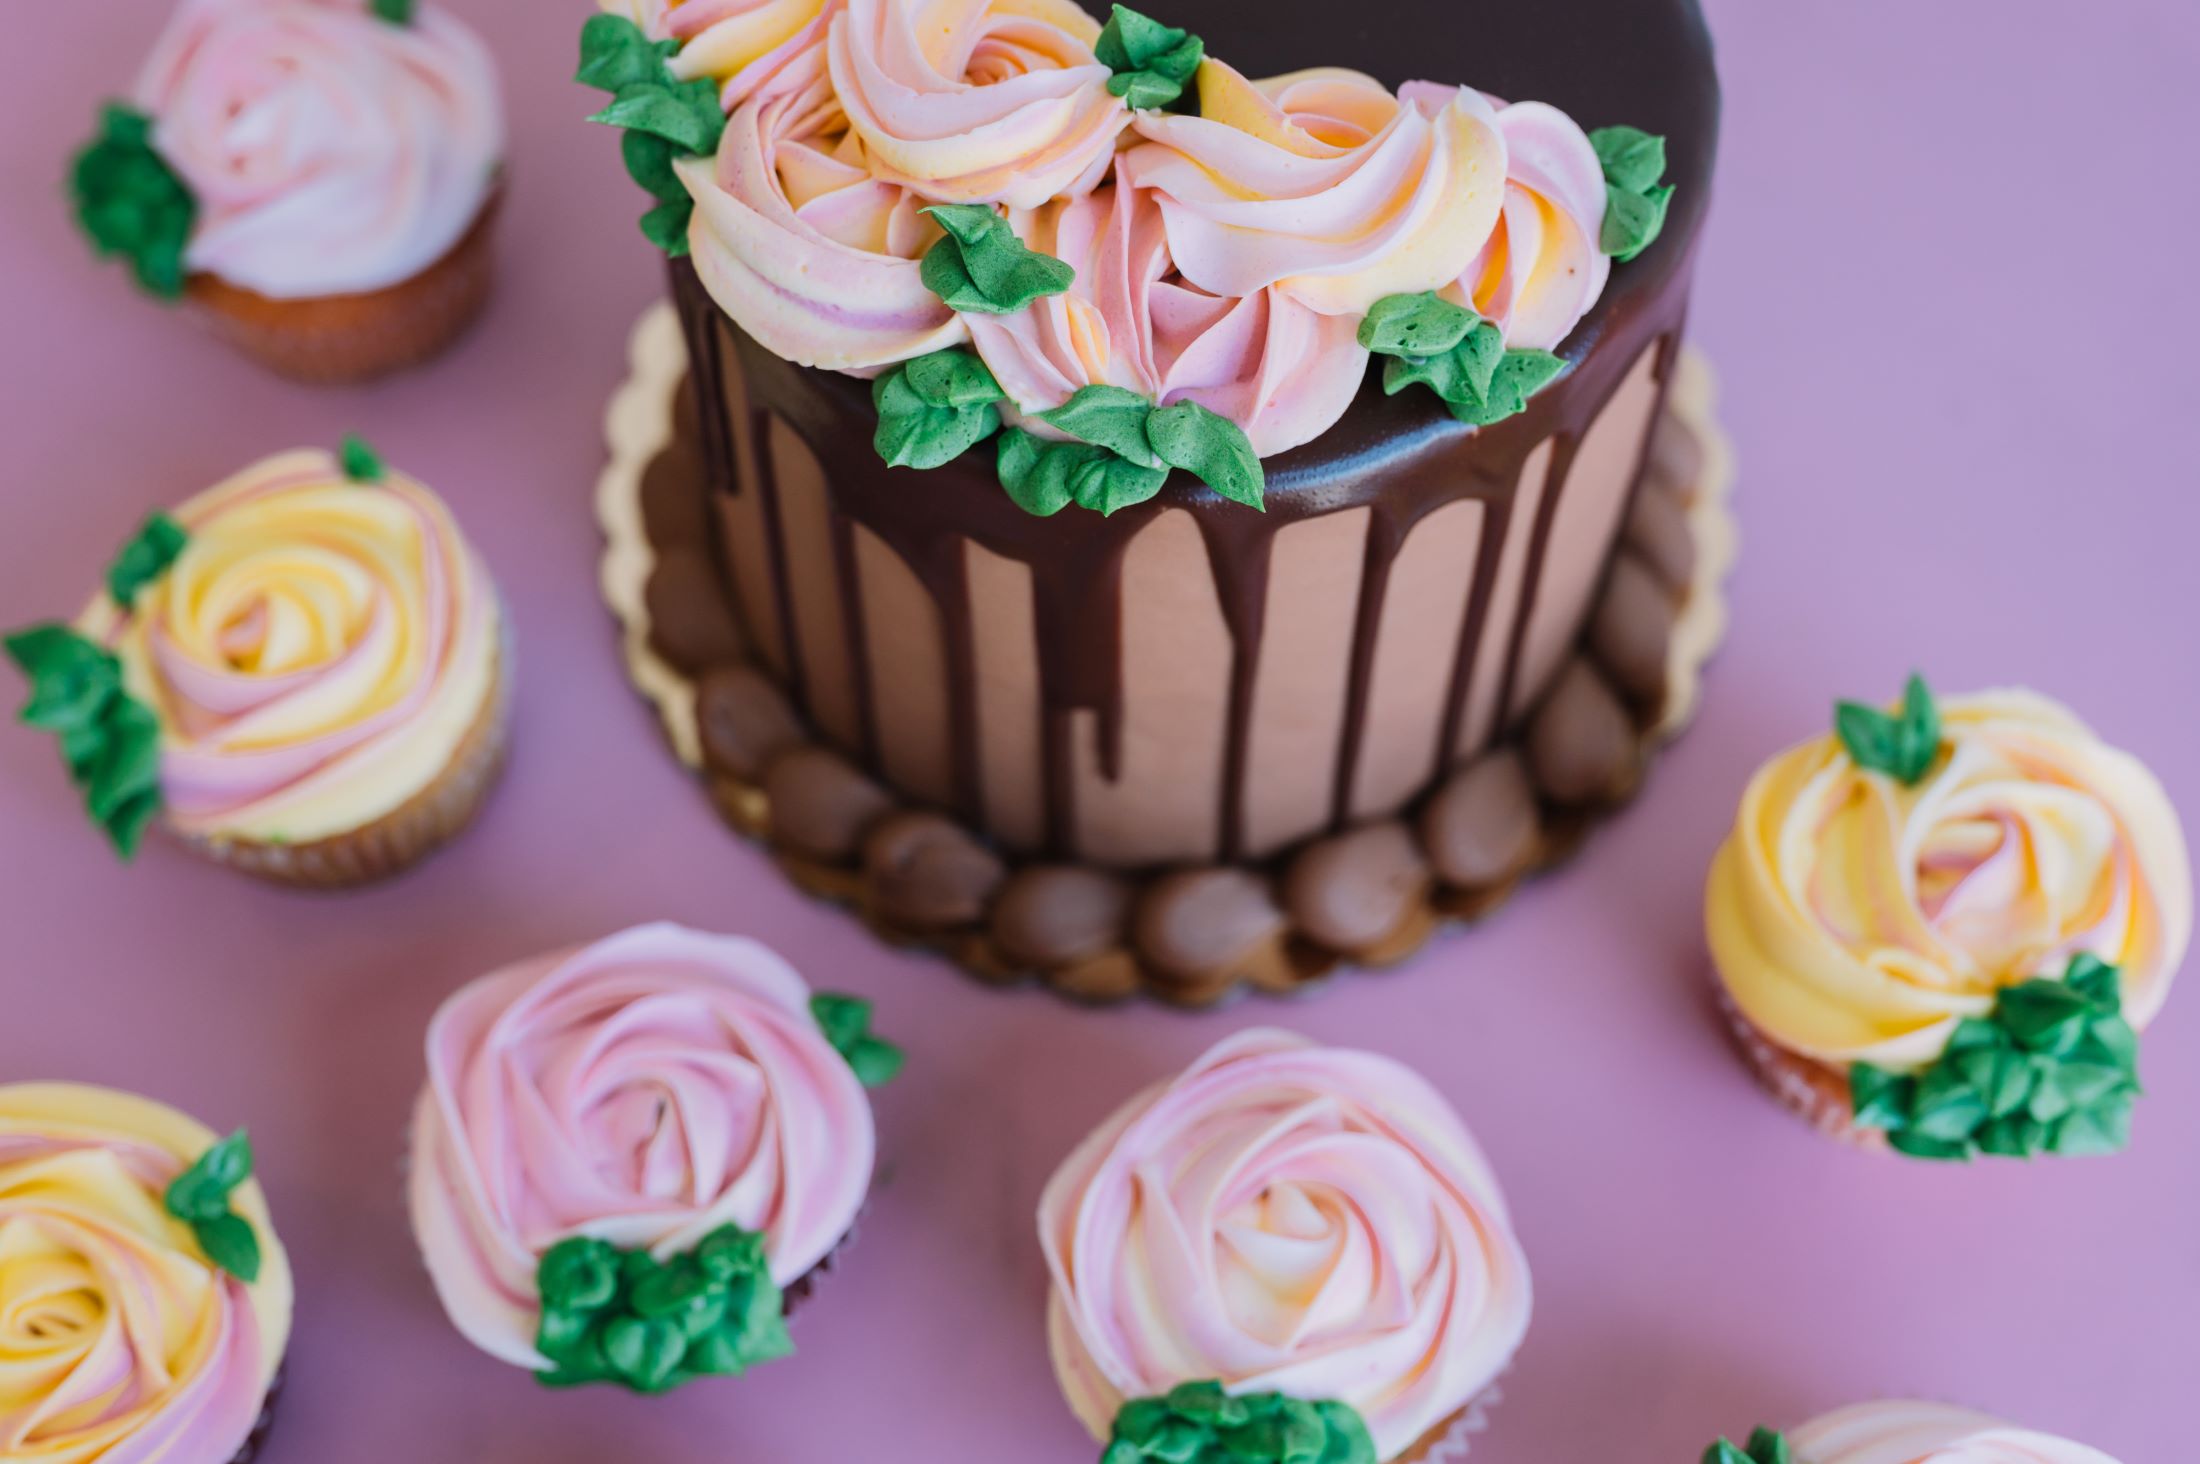 An image of a floral Mother's Day cake from Hotcakes Bakes,